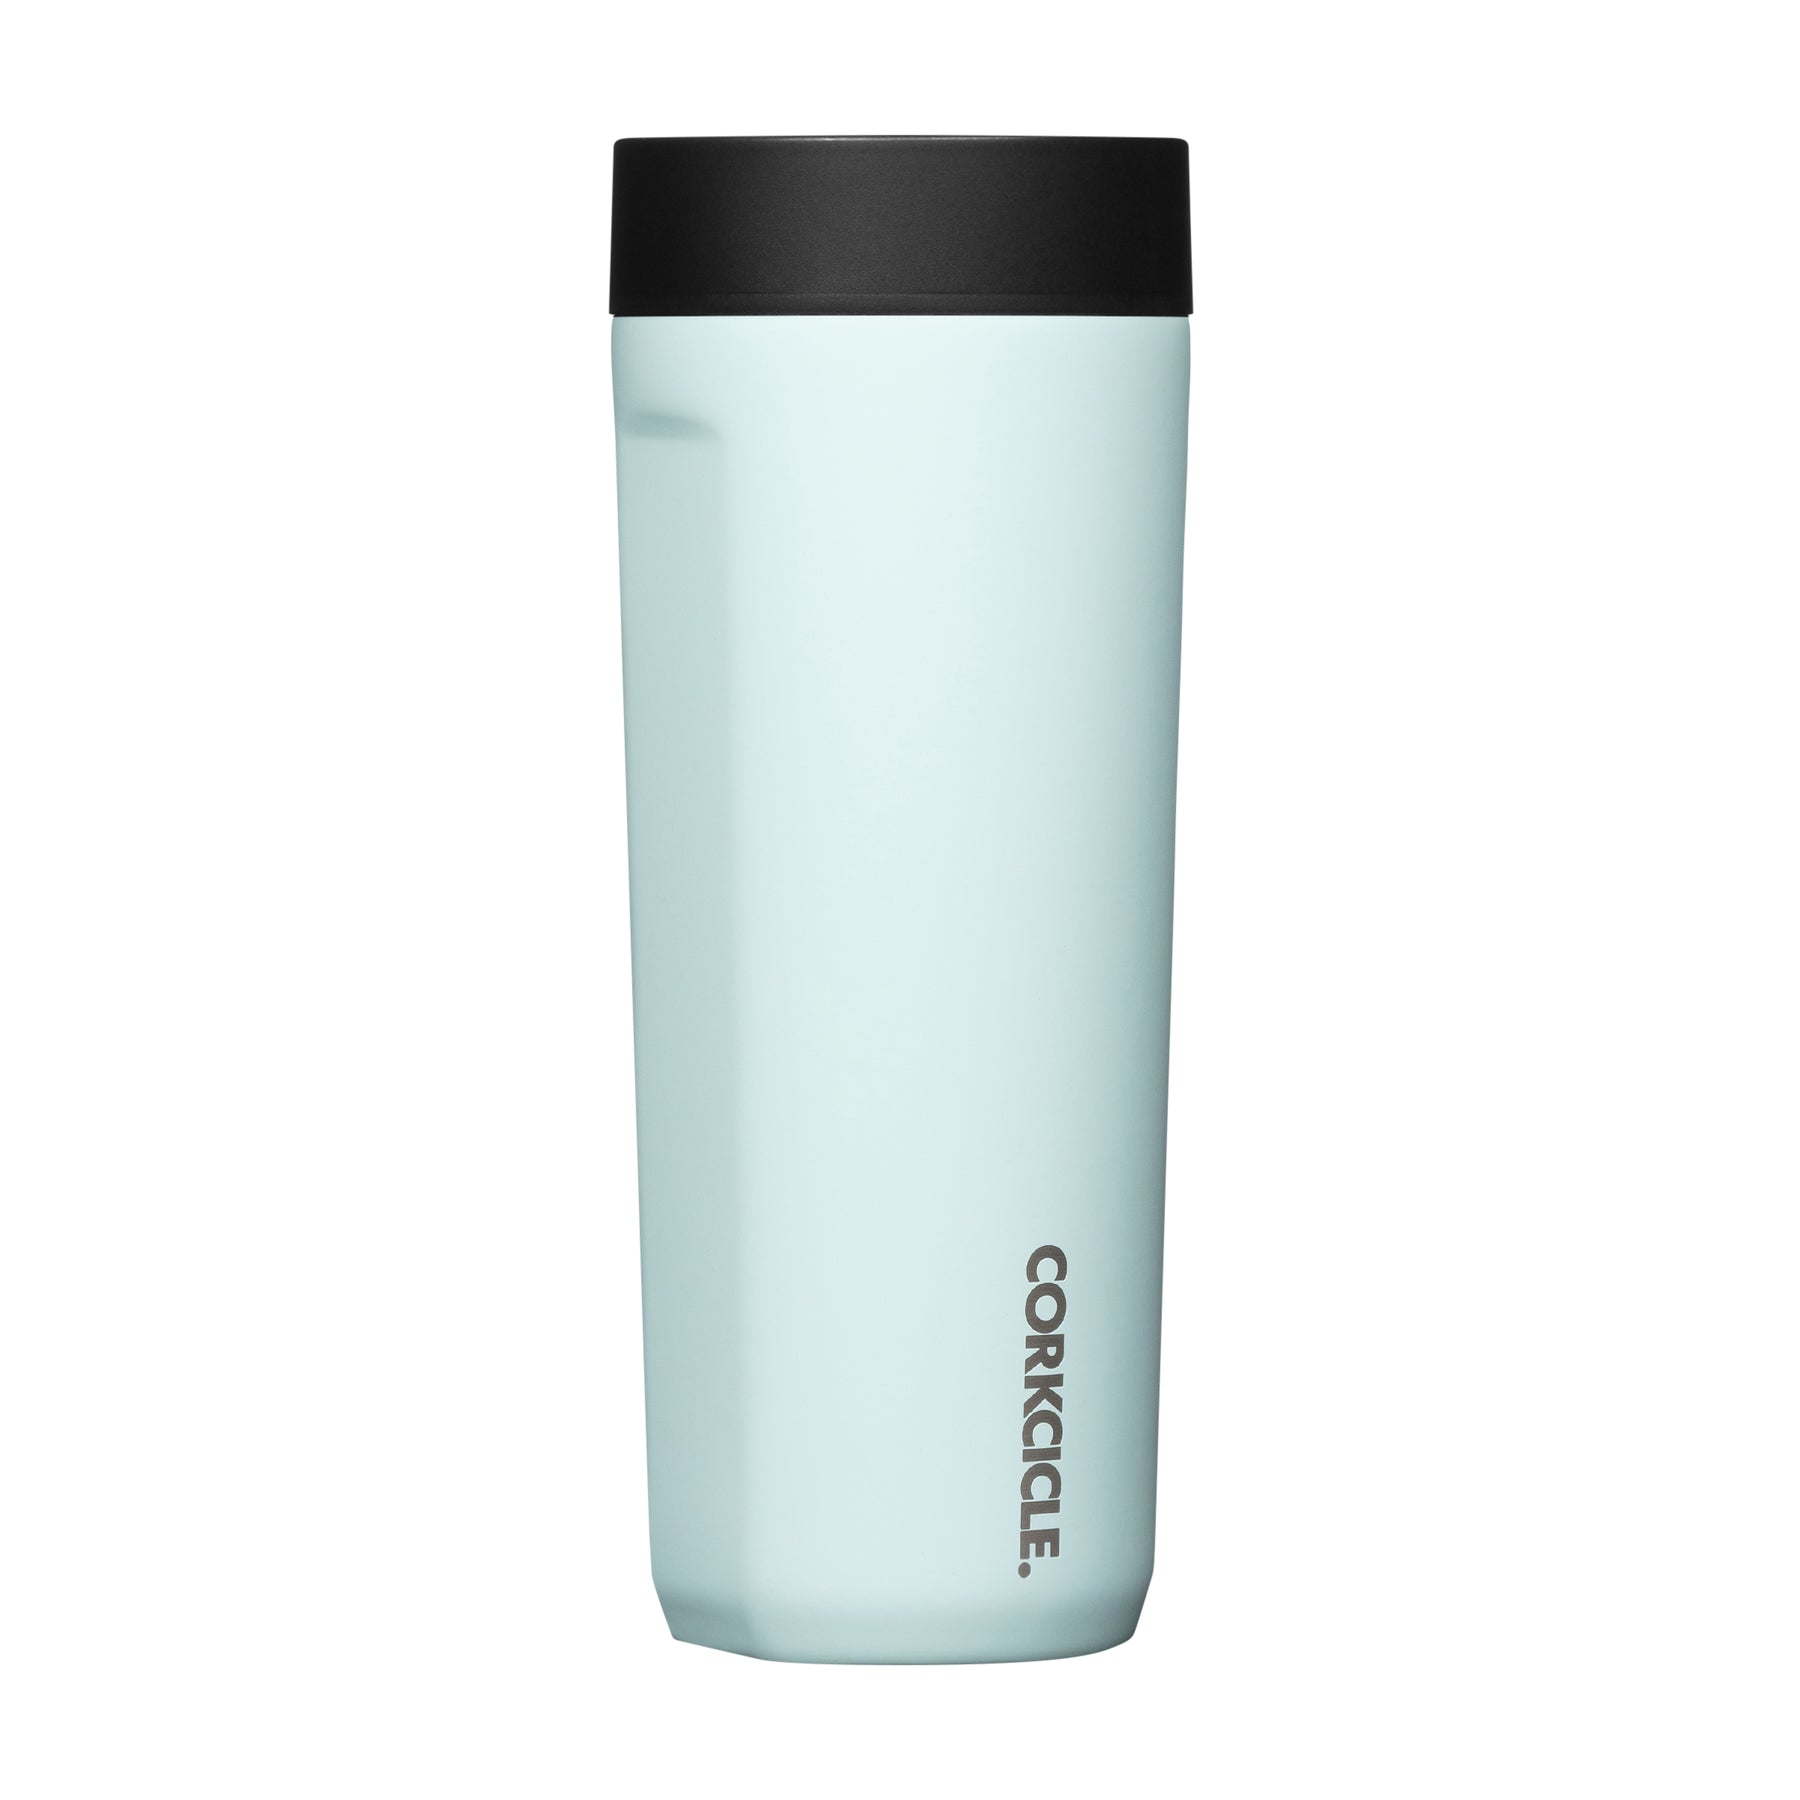 30 Oz. Cold Cup by Corkcicle in Storm